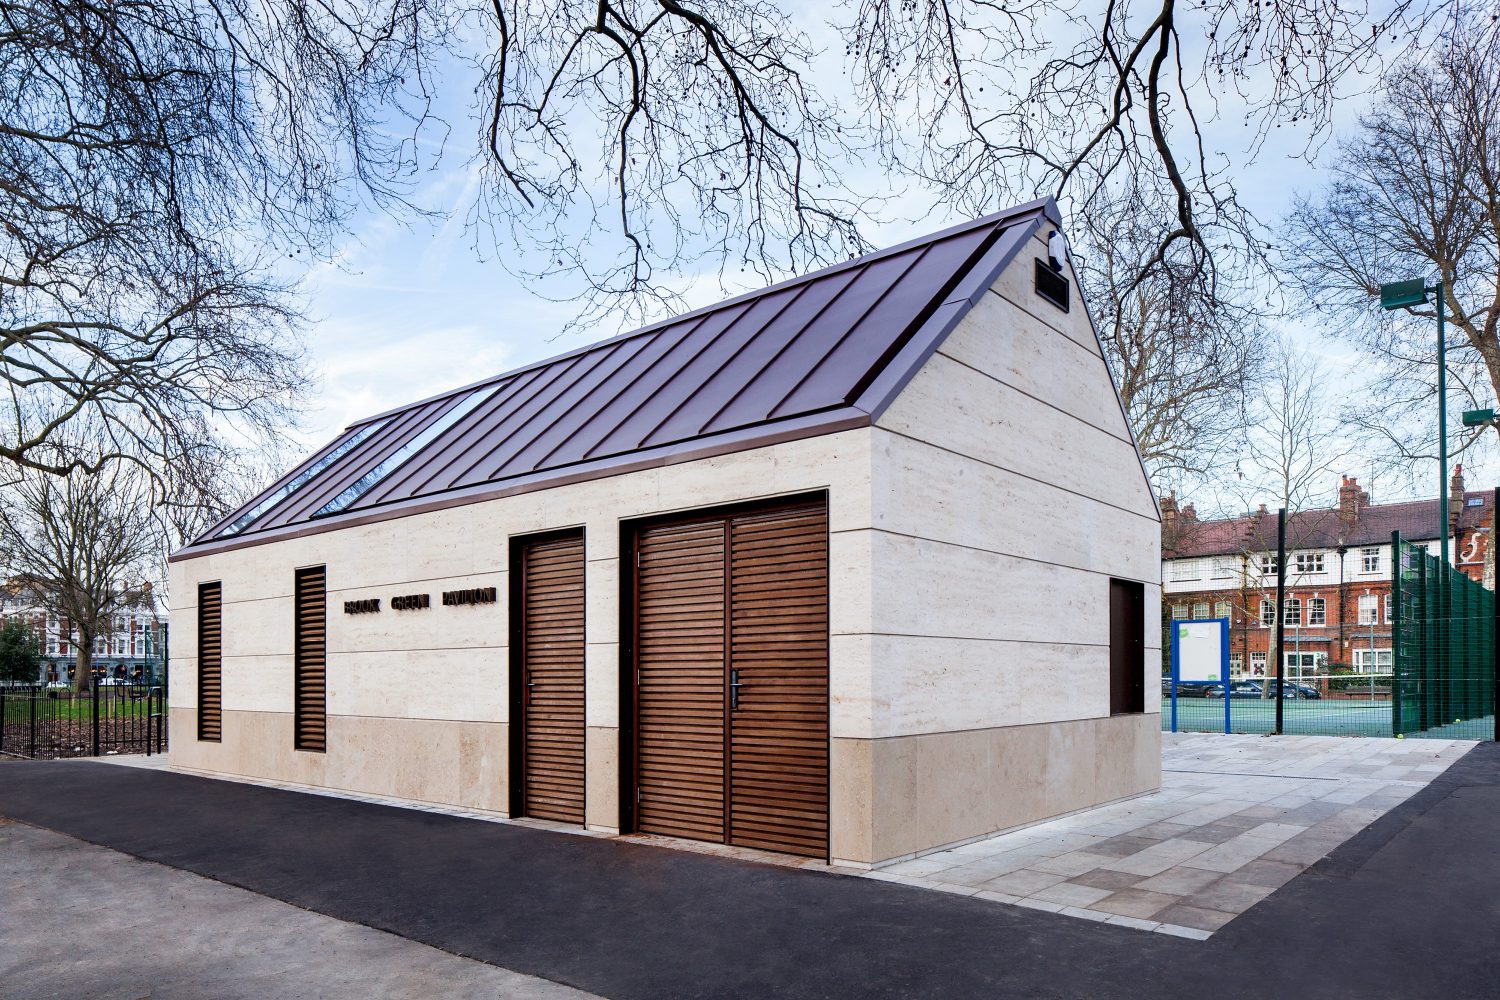 Brook Green Pavilion by De Rosee Sa Architects